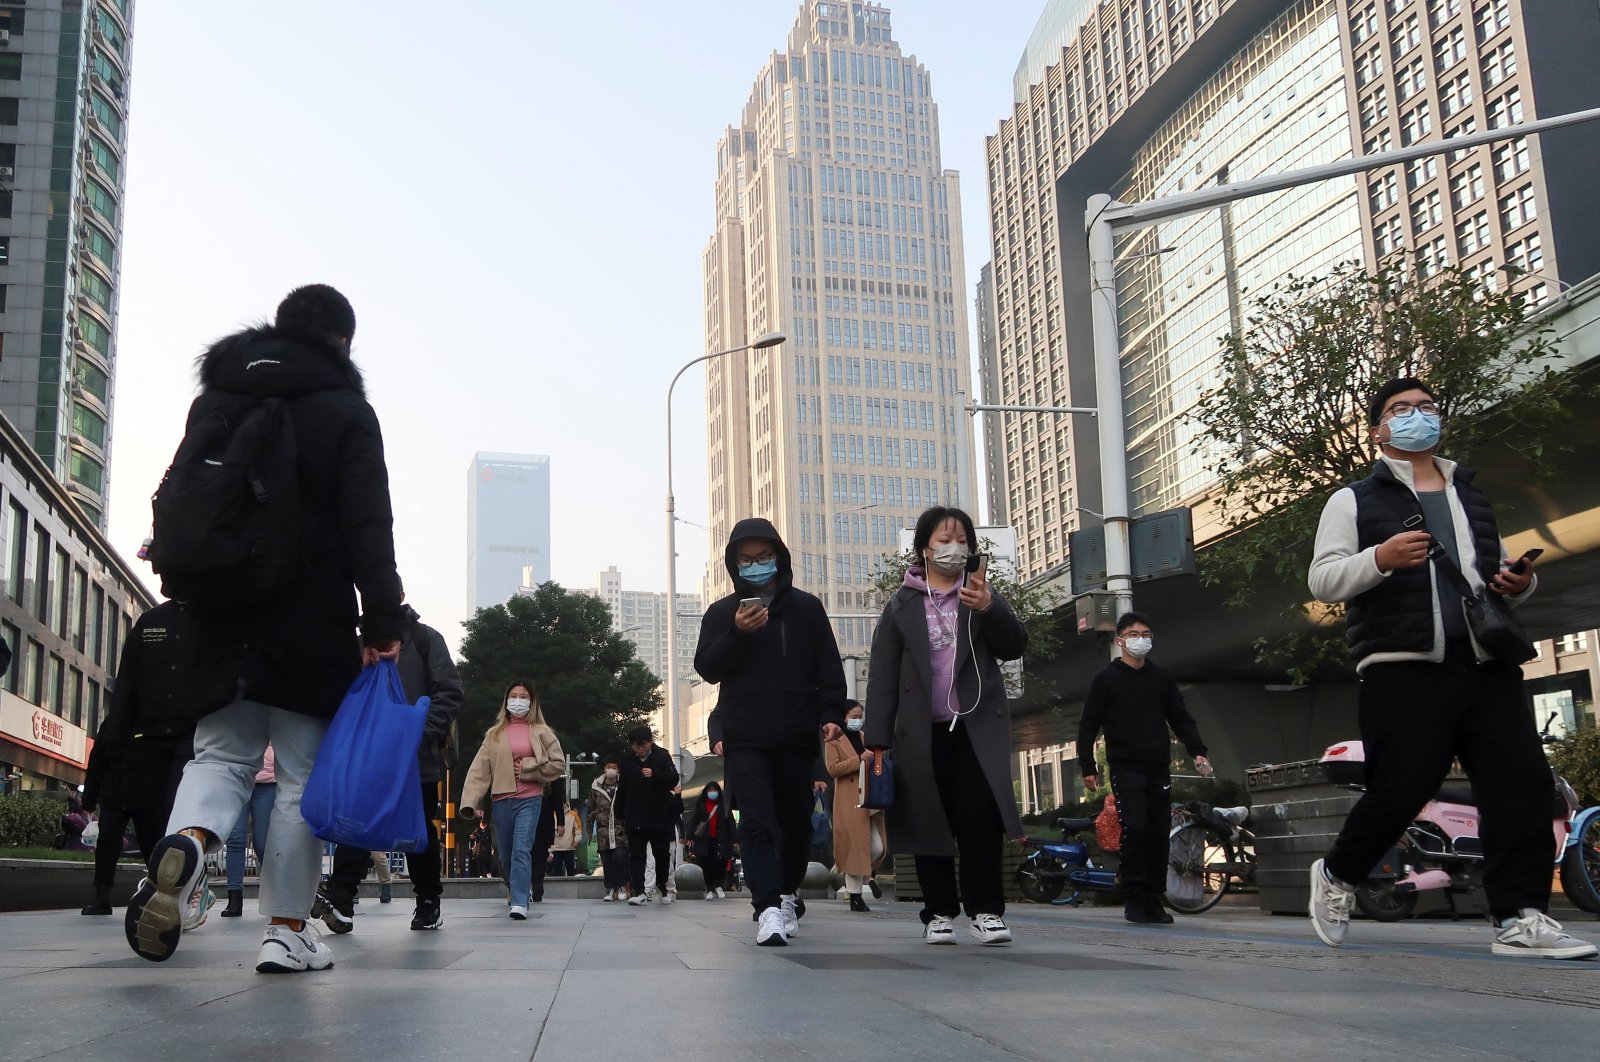 People walk on a street during morning rush hour in Wuchang district, after the government gradually loosened the restrictions on COVID-19 control, Wuhan, Hubei province, China, Dec. 9, 2022. (Reuters Photo)